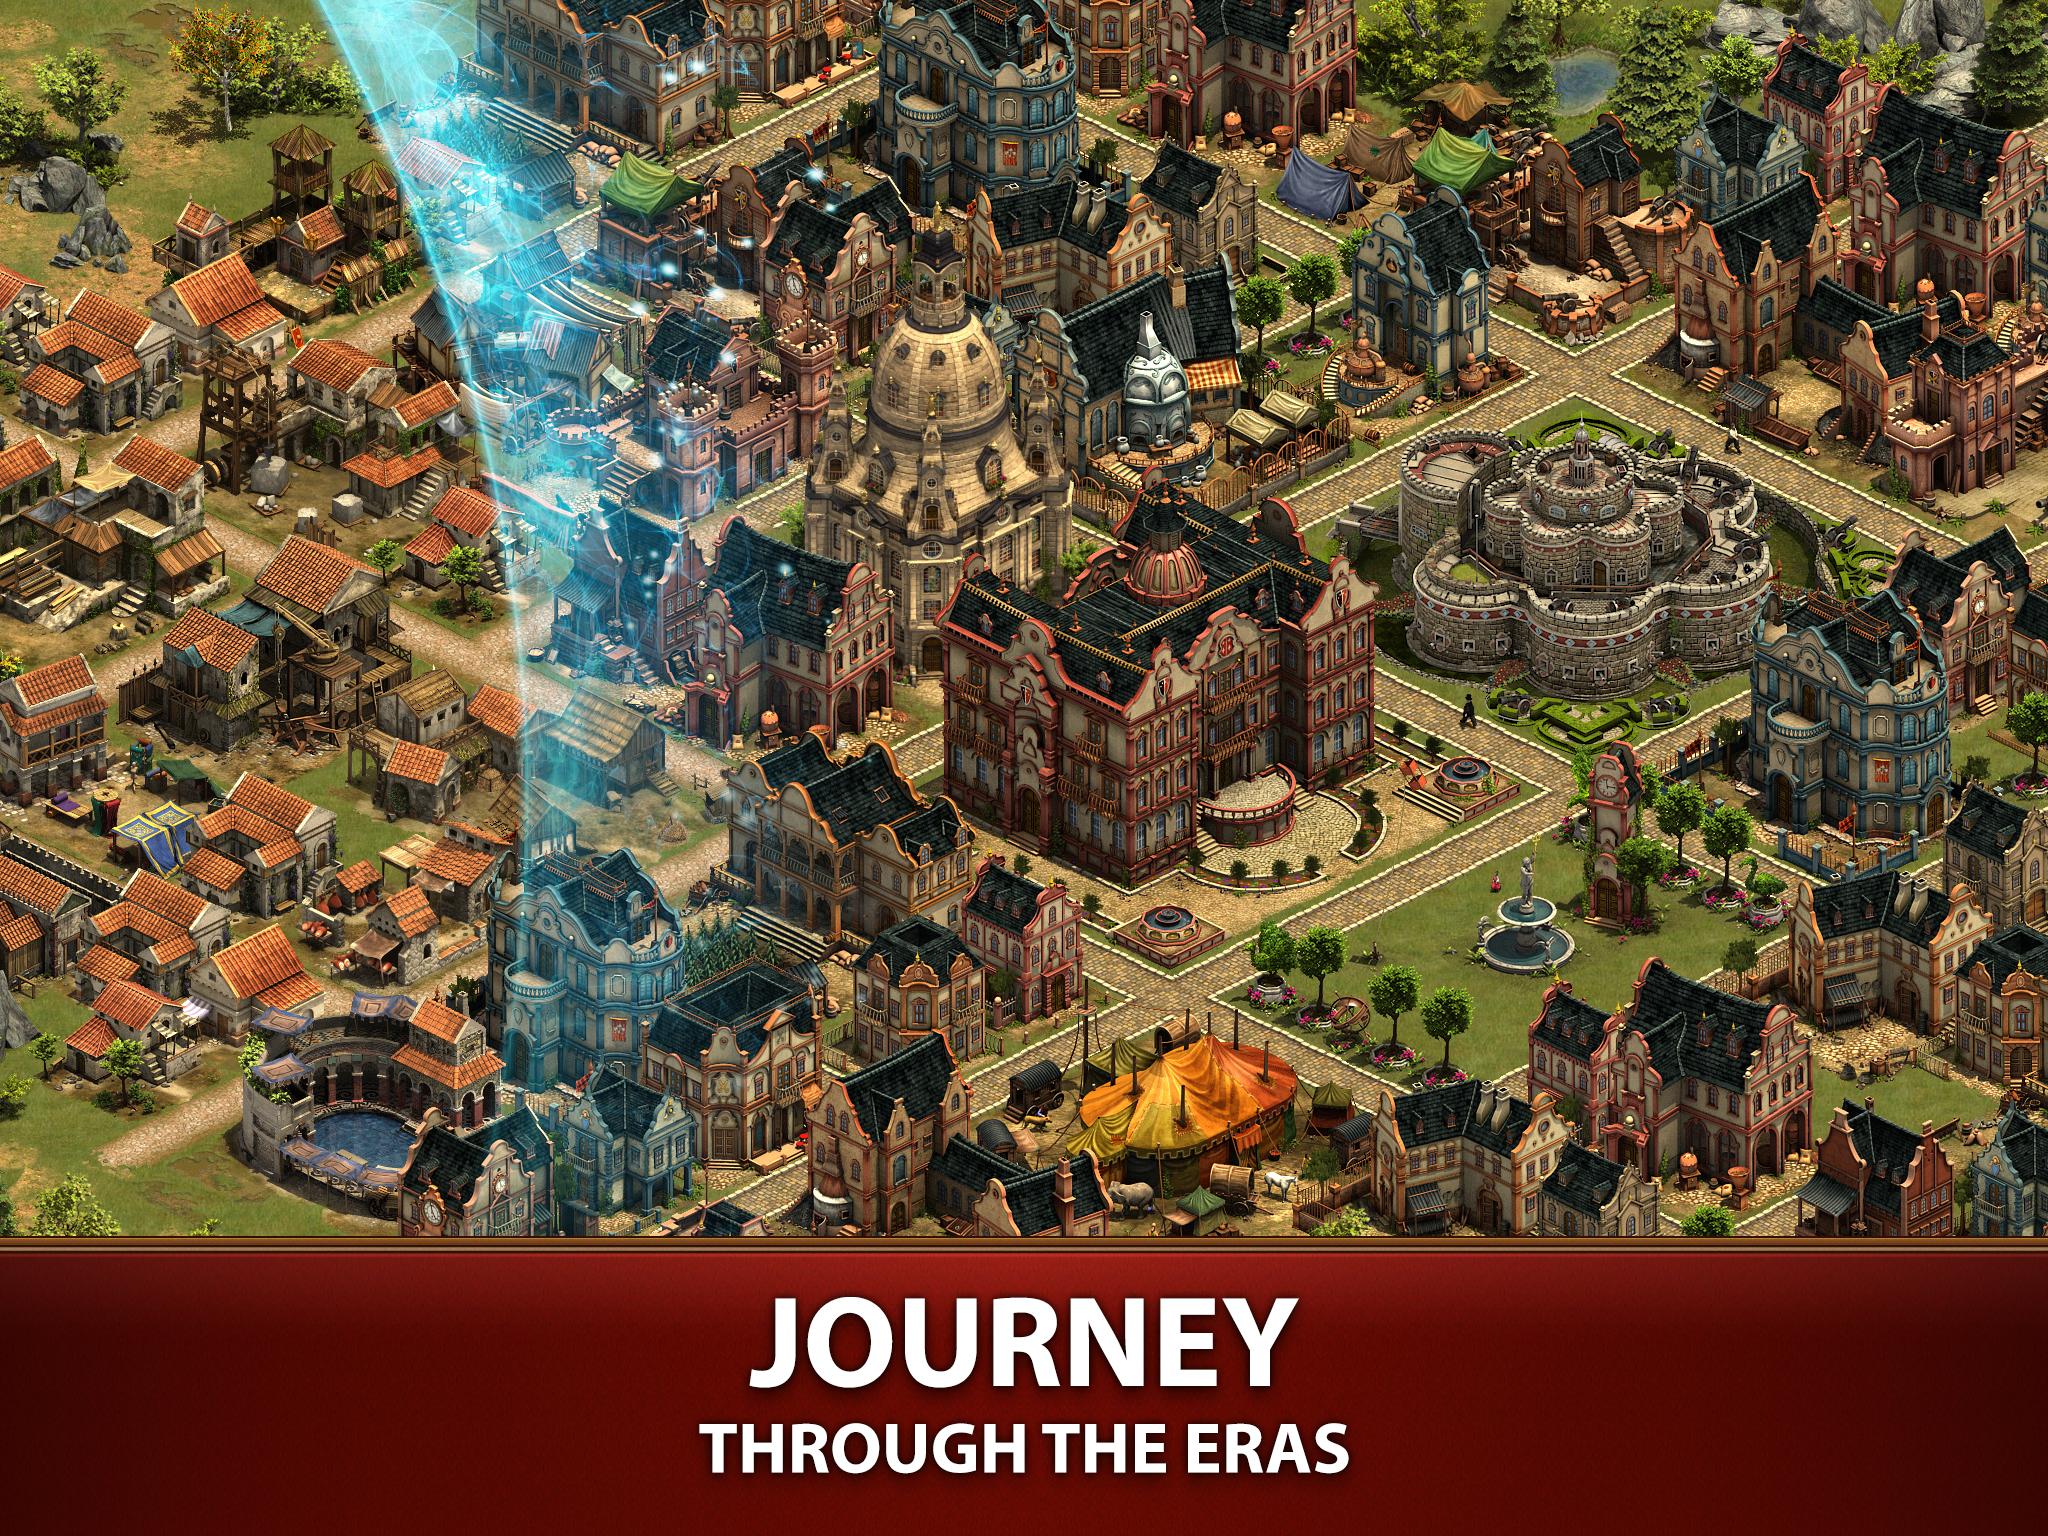 forge of empires new virtual future gb